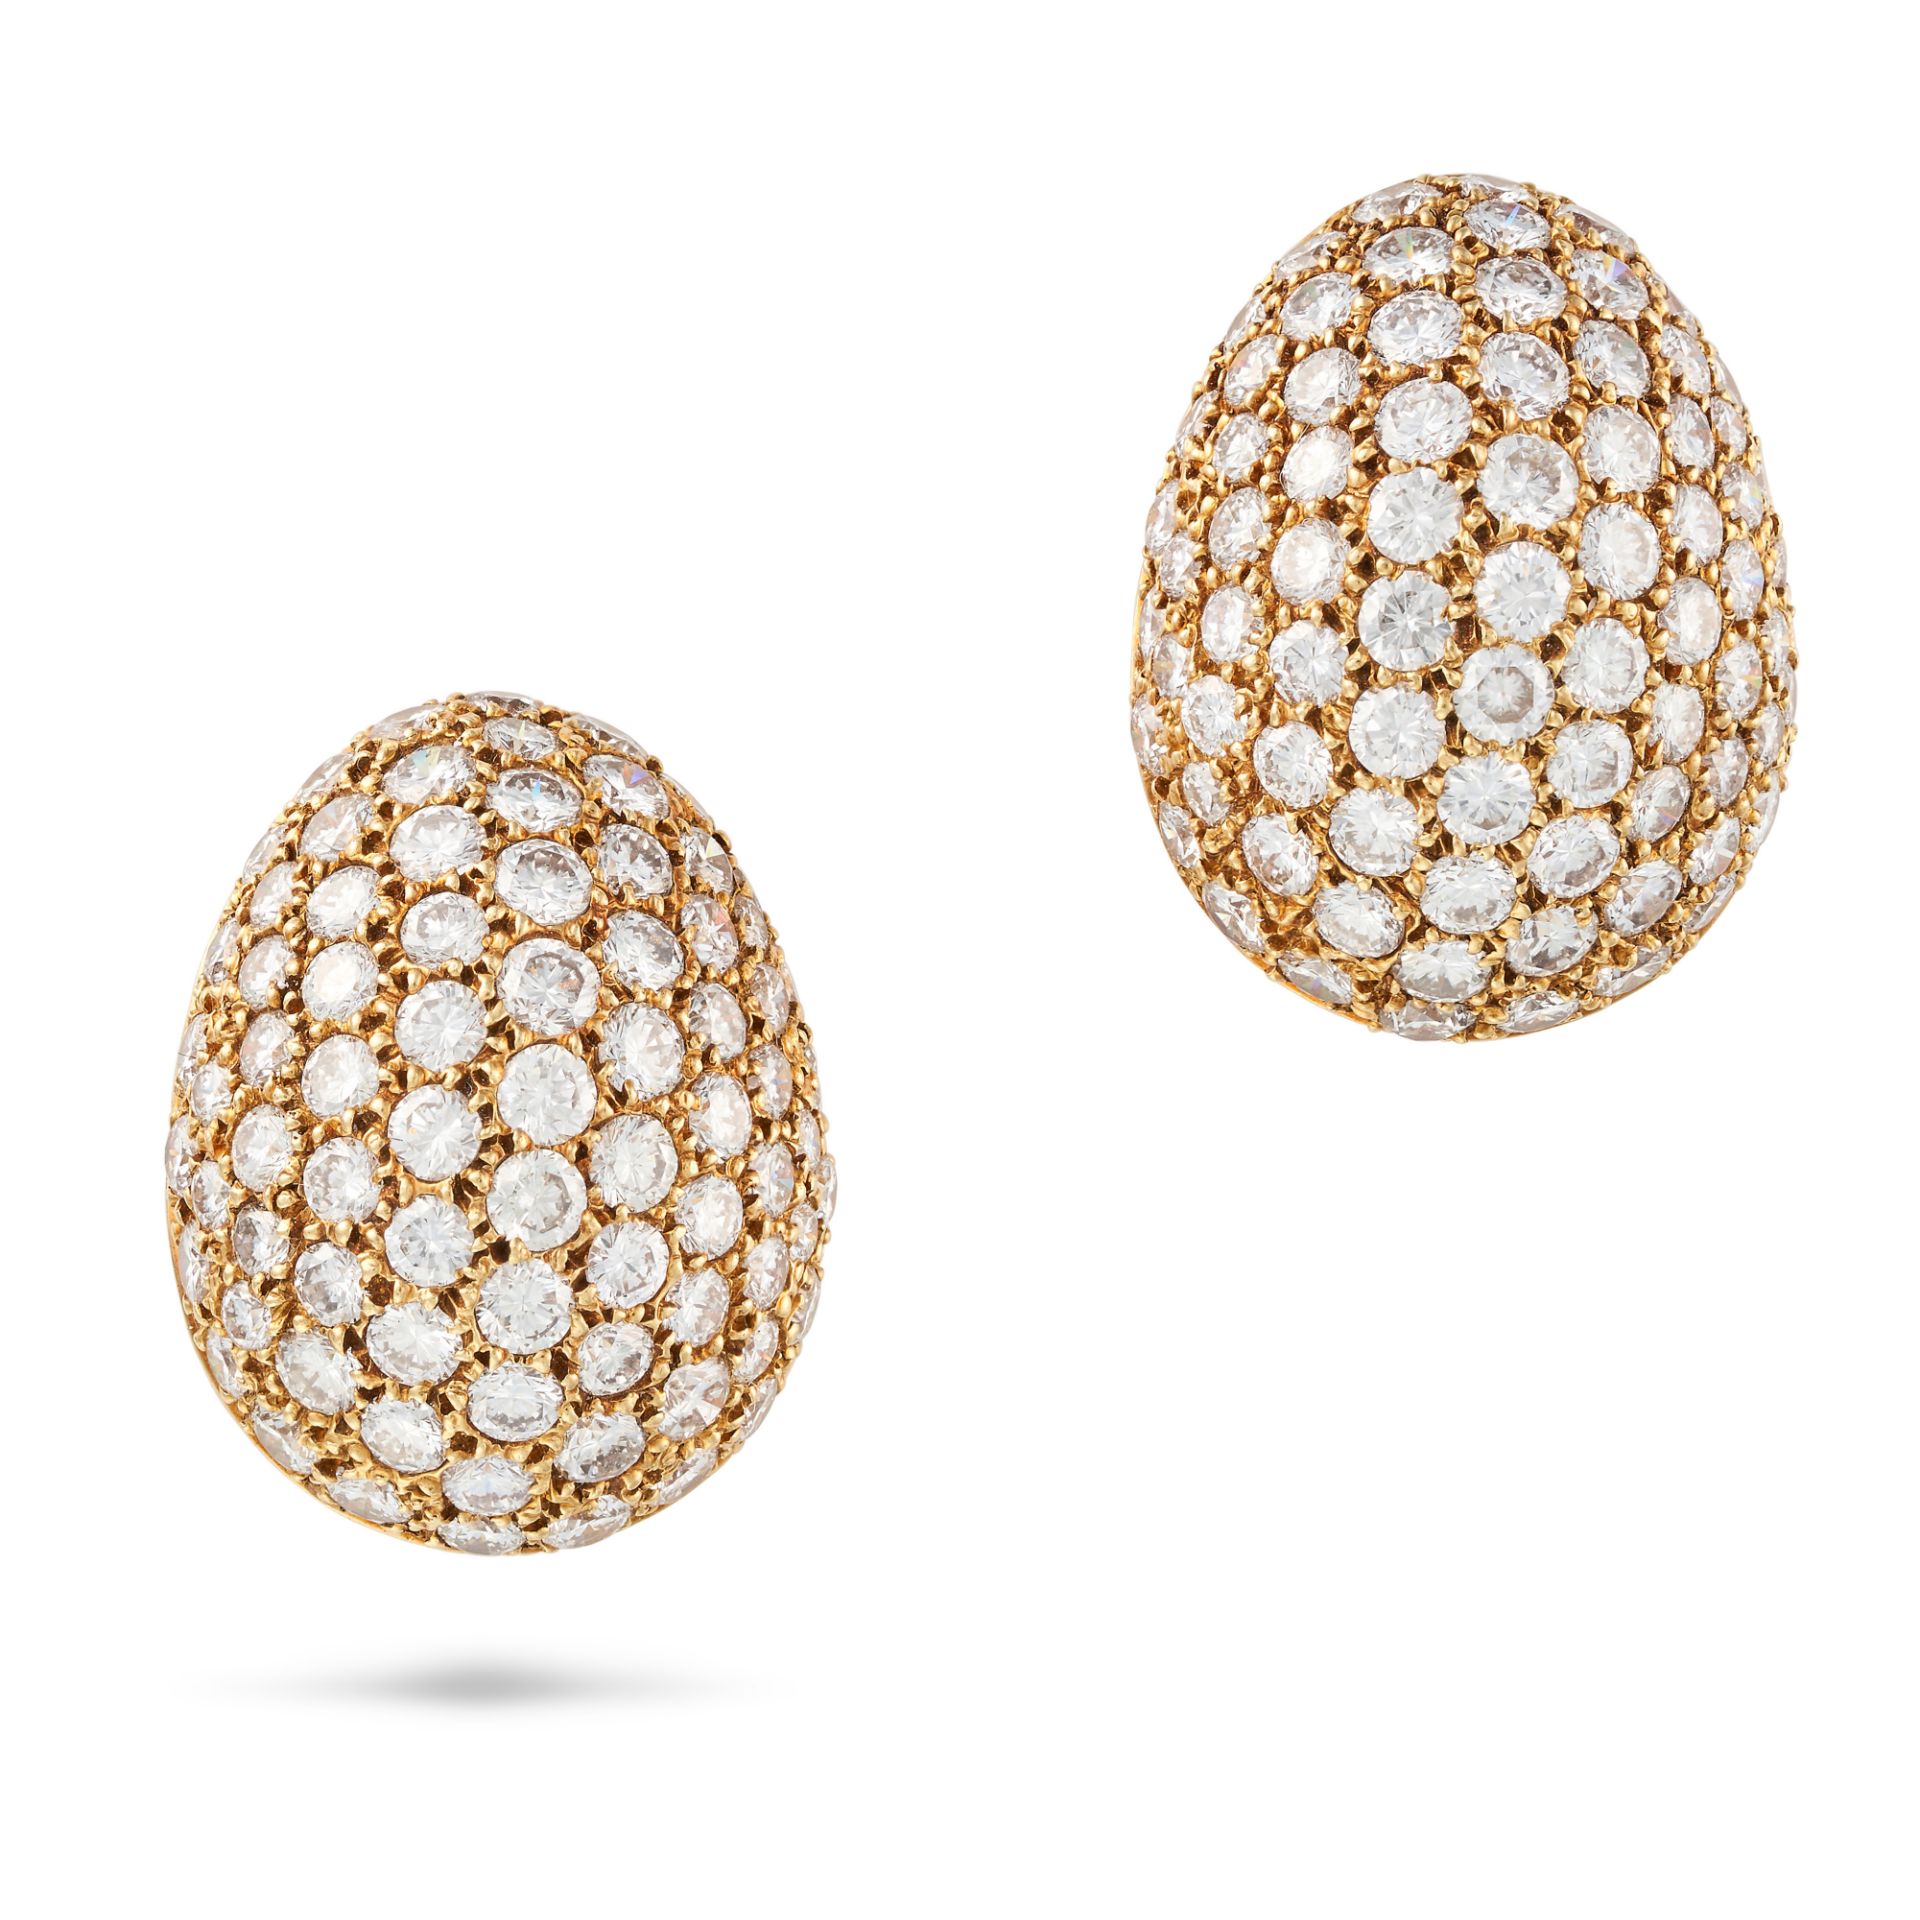 VAN CLEEF & ARPELS, A PAIR OF DIAMOND BOMBE EARRINGS each domed face pave set with round brillian...